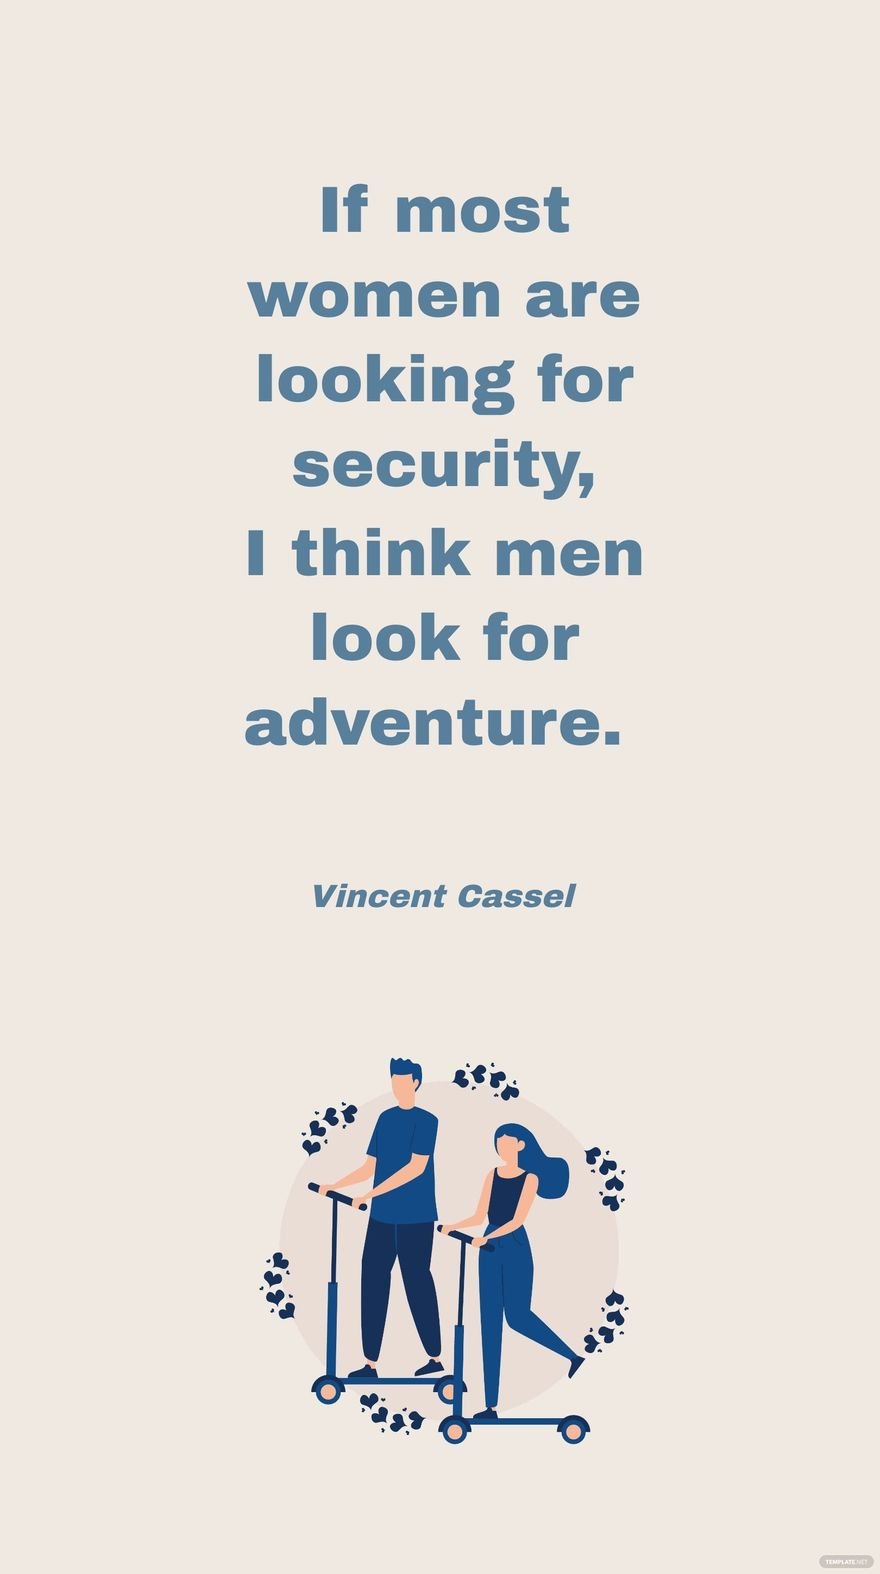 Vincent Cassel - If most women are looking for security, I think men look for adventure.